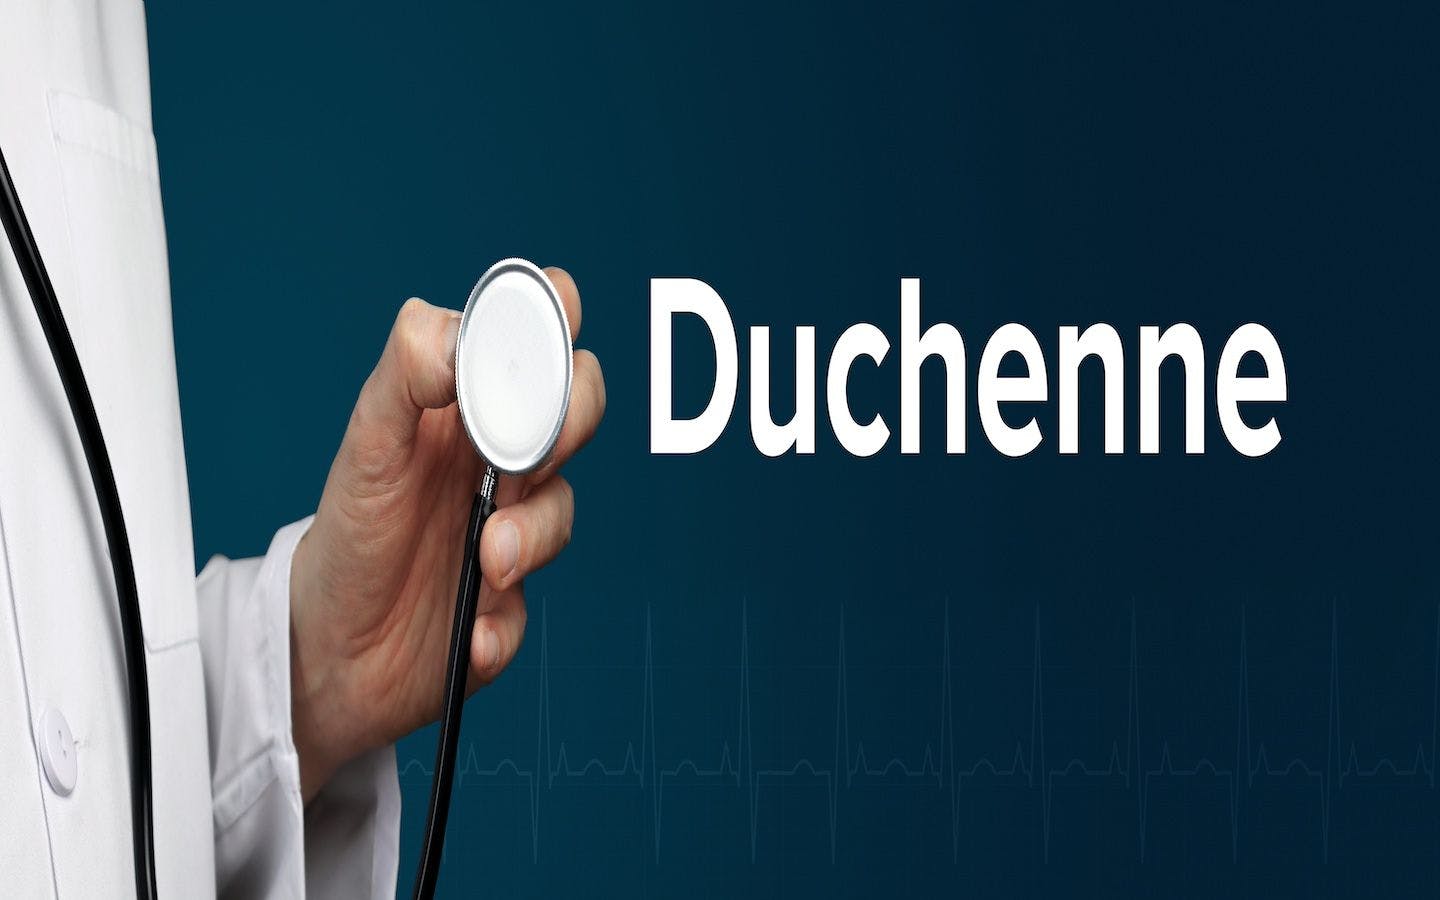 Doctor in lab coat holds stethoscope. The word Duchenne is written next to it | Image Credit: MQ-Illustrations - stock.adobe.com